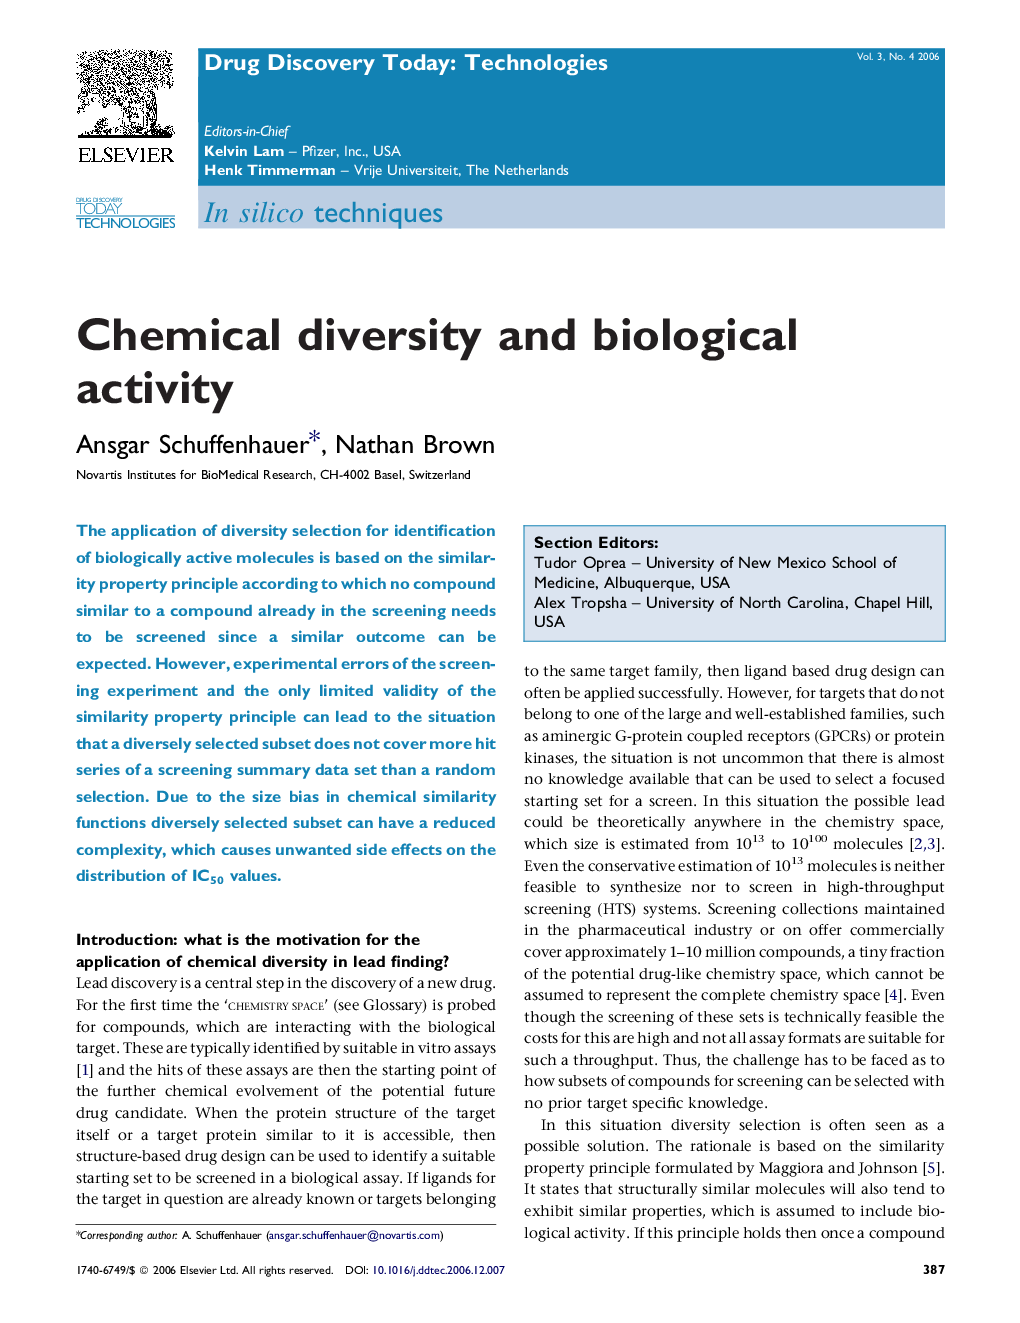 Chemical diversity and biological activity